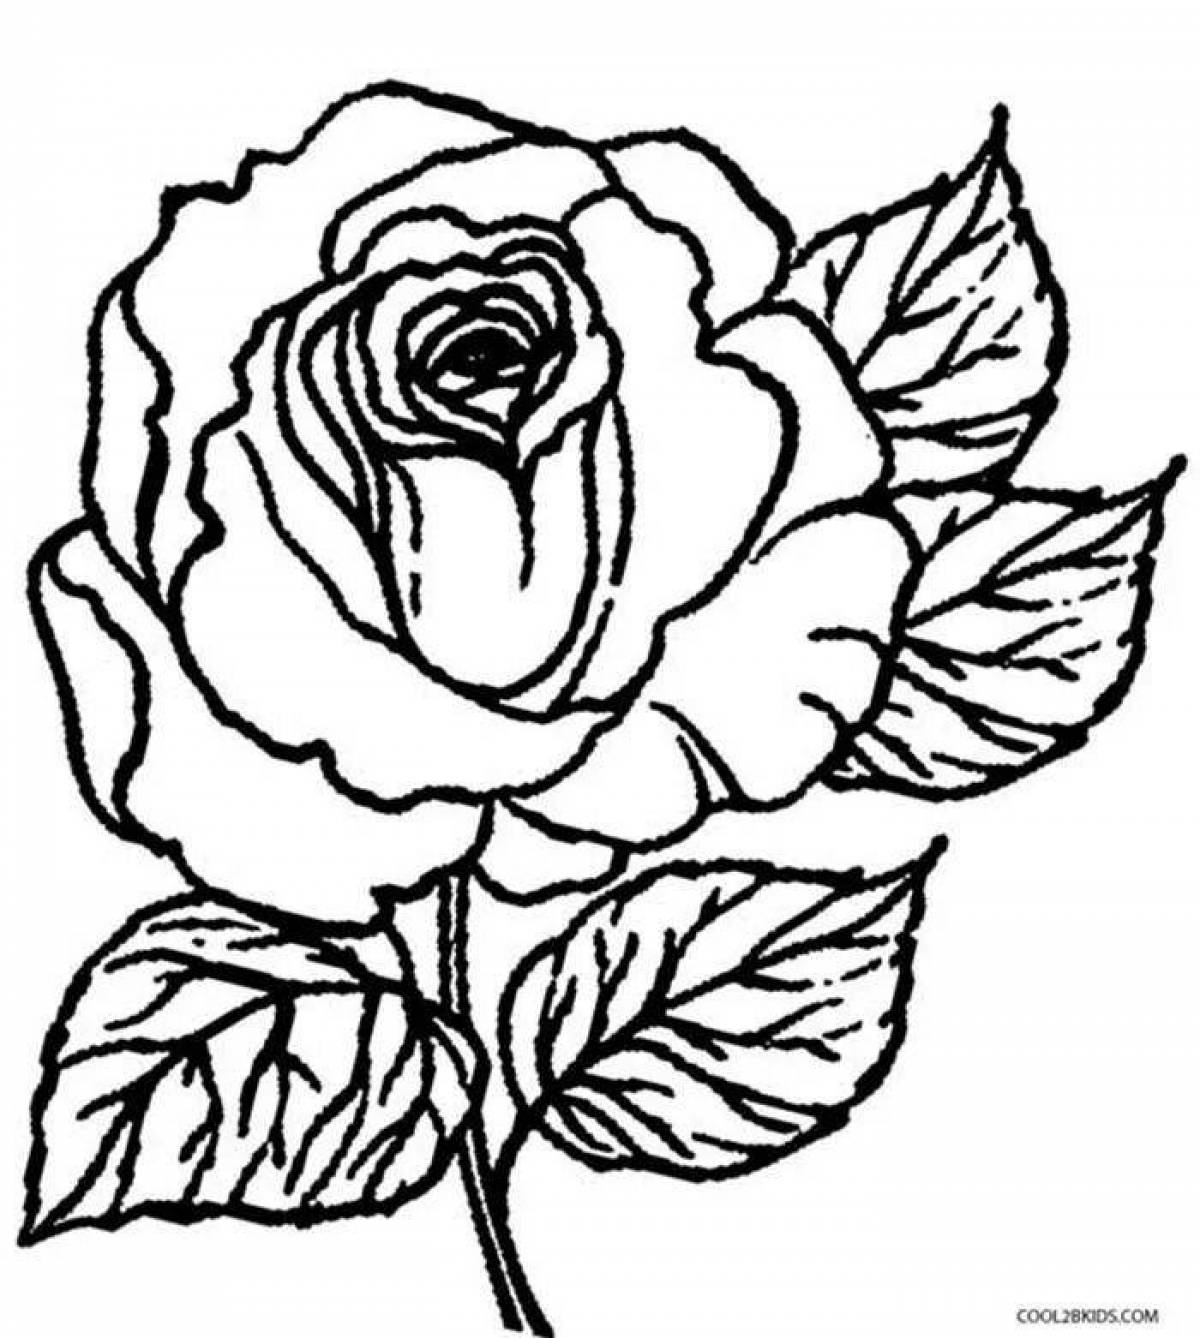 Awesome rose coloring page